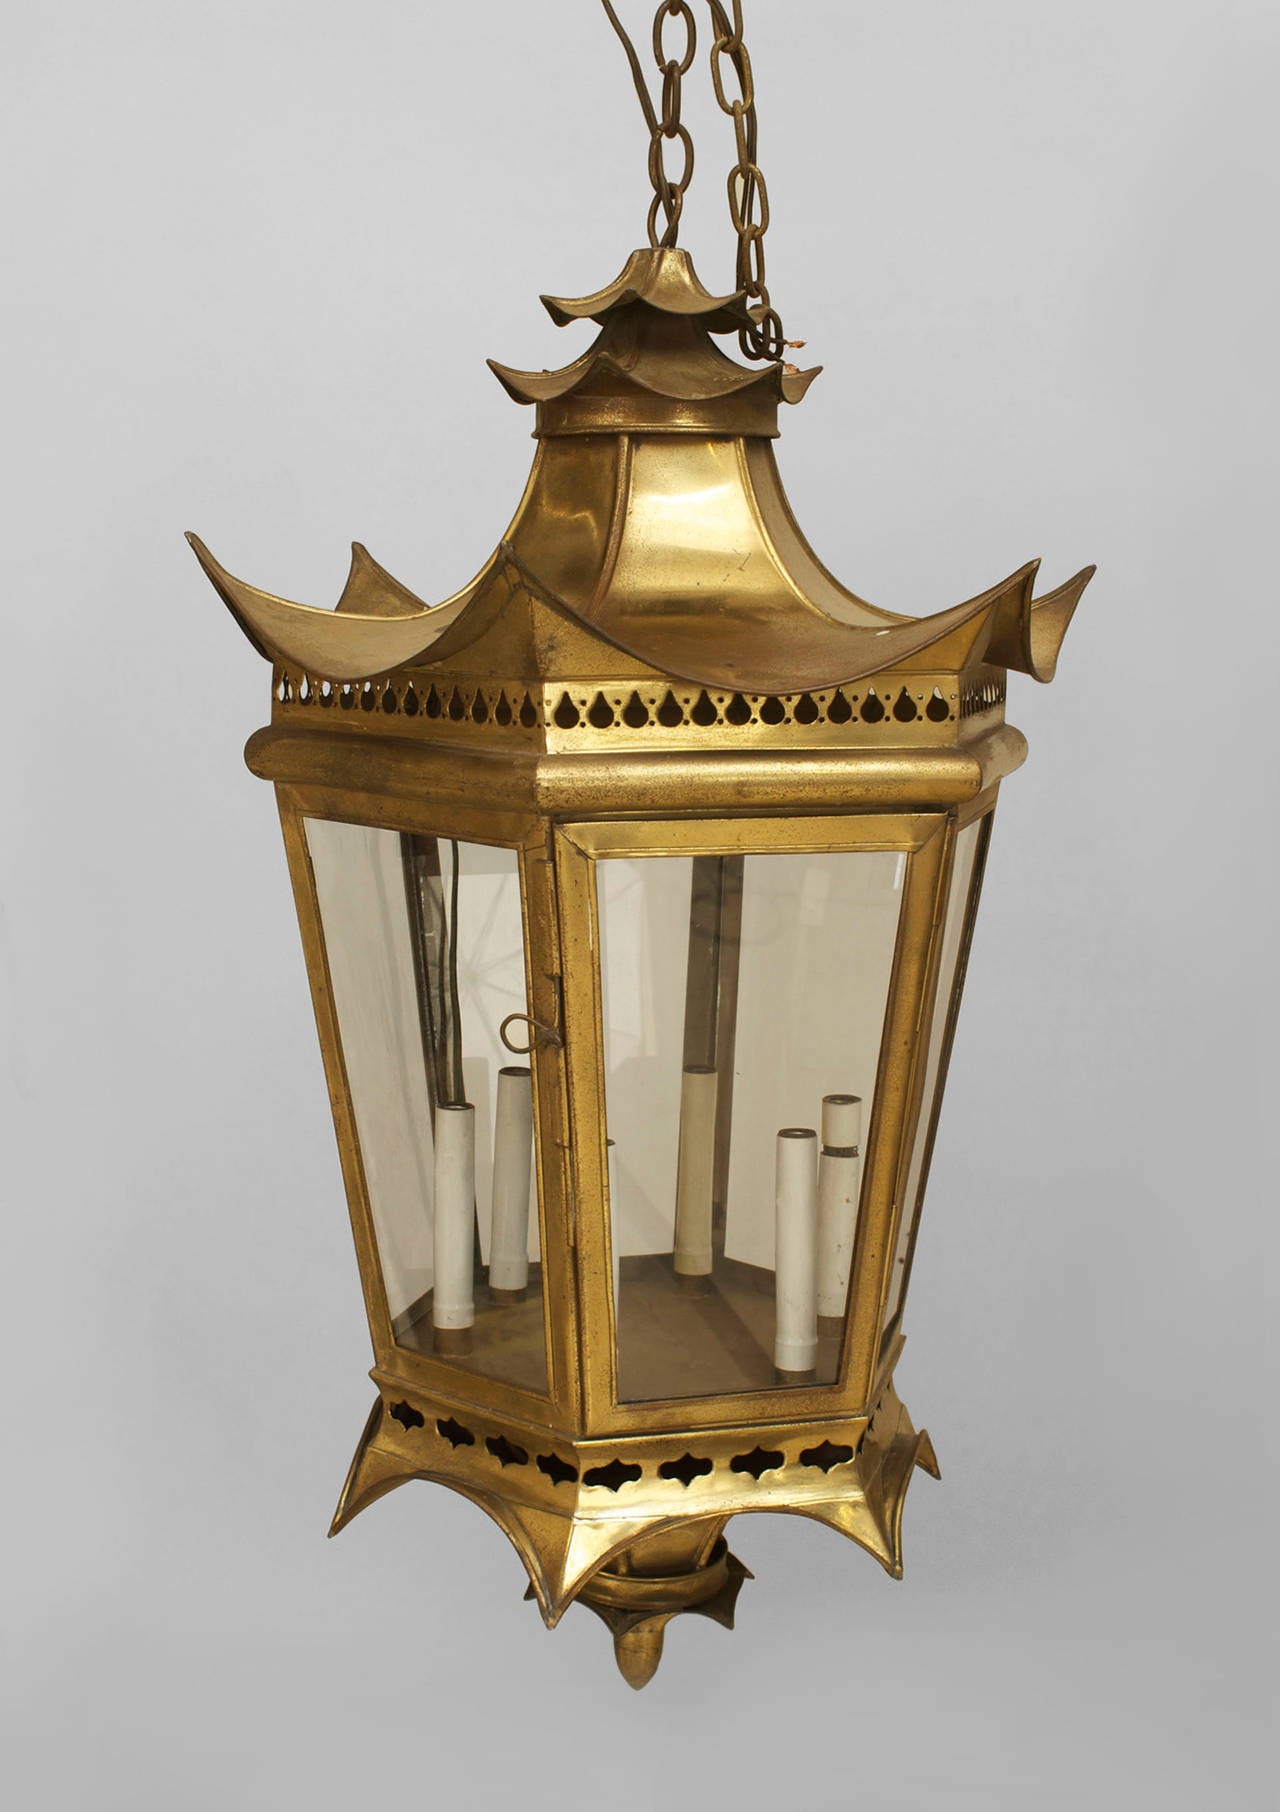 2 Asian Chinese style (1940s) brass 8 sided glass panel lanterns with a filigree and pagoda design top and bottom finial (PRICED EACH)
